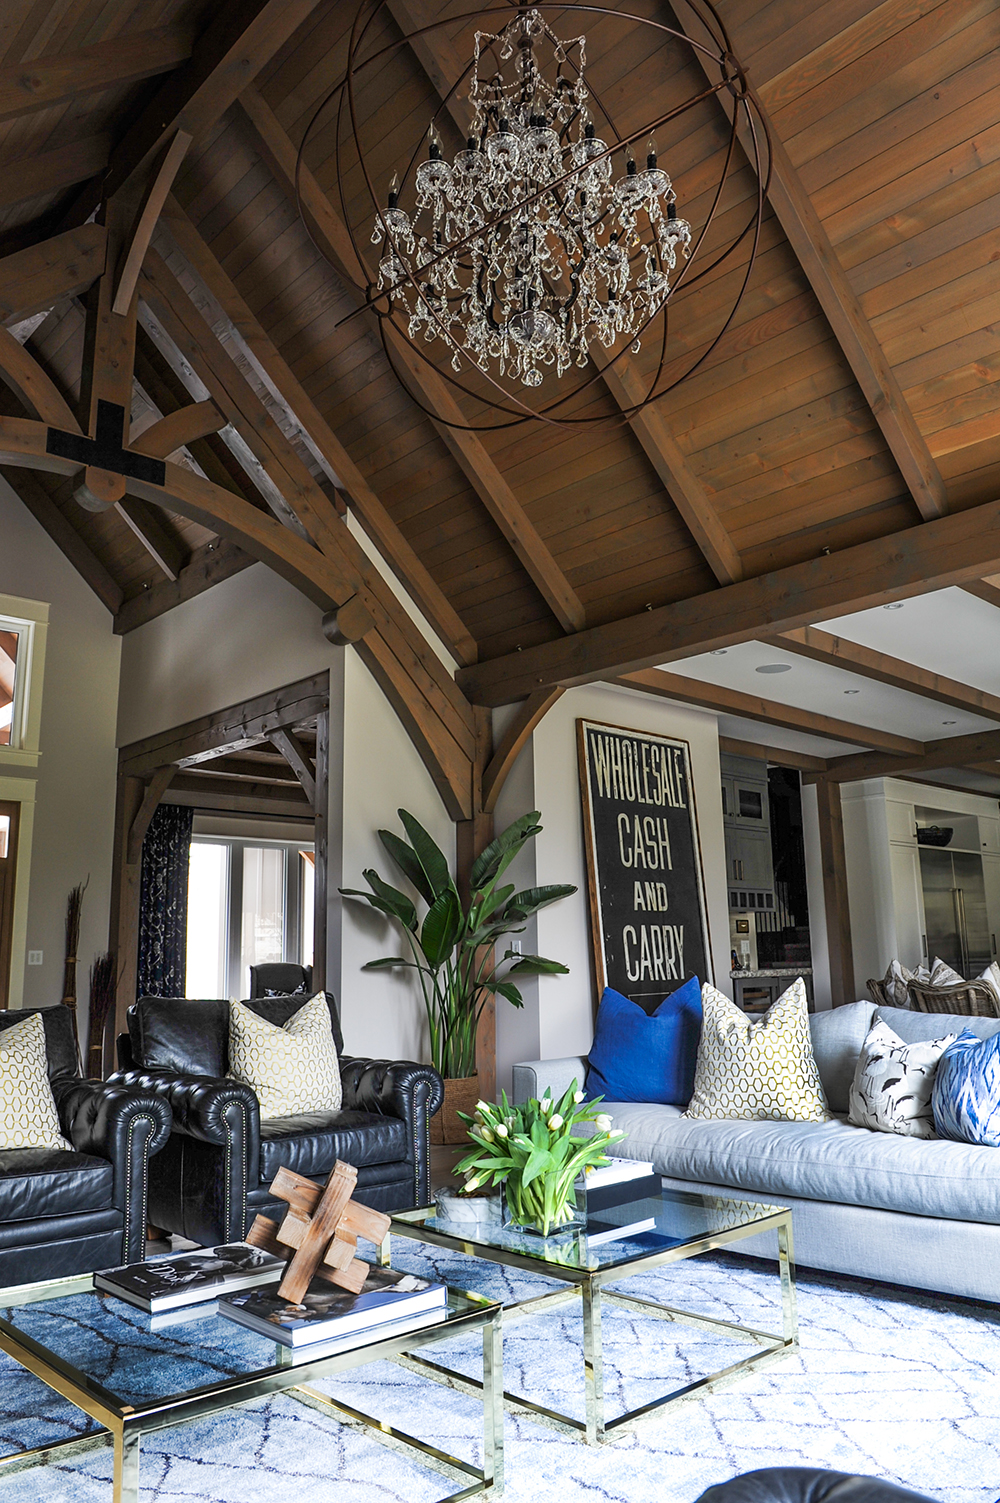 The living room's stunning chandelier, from Restoration Hardware